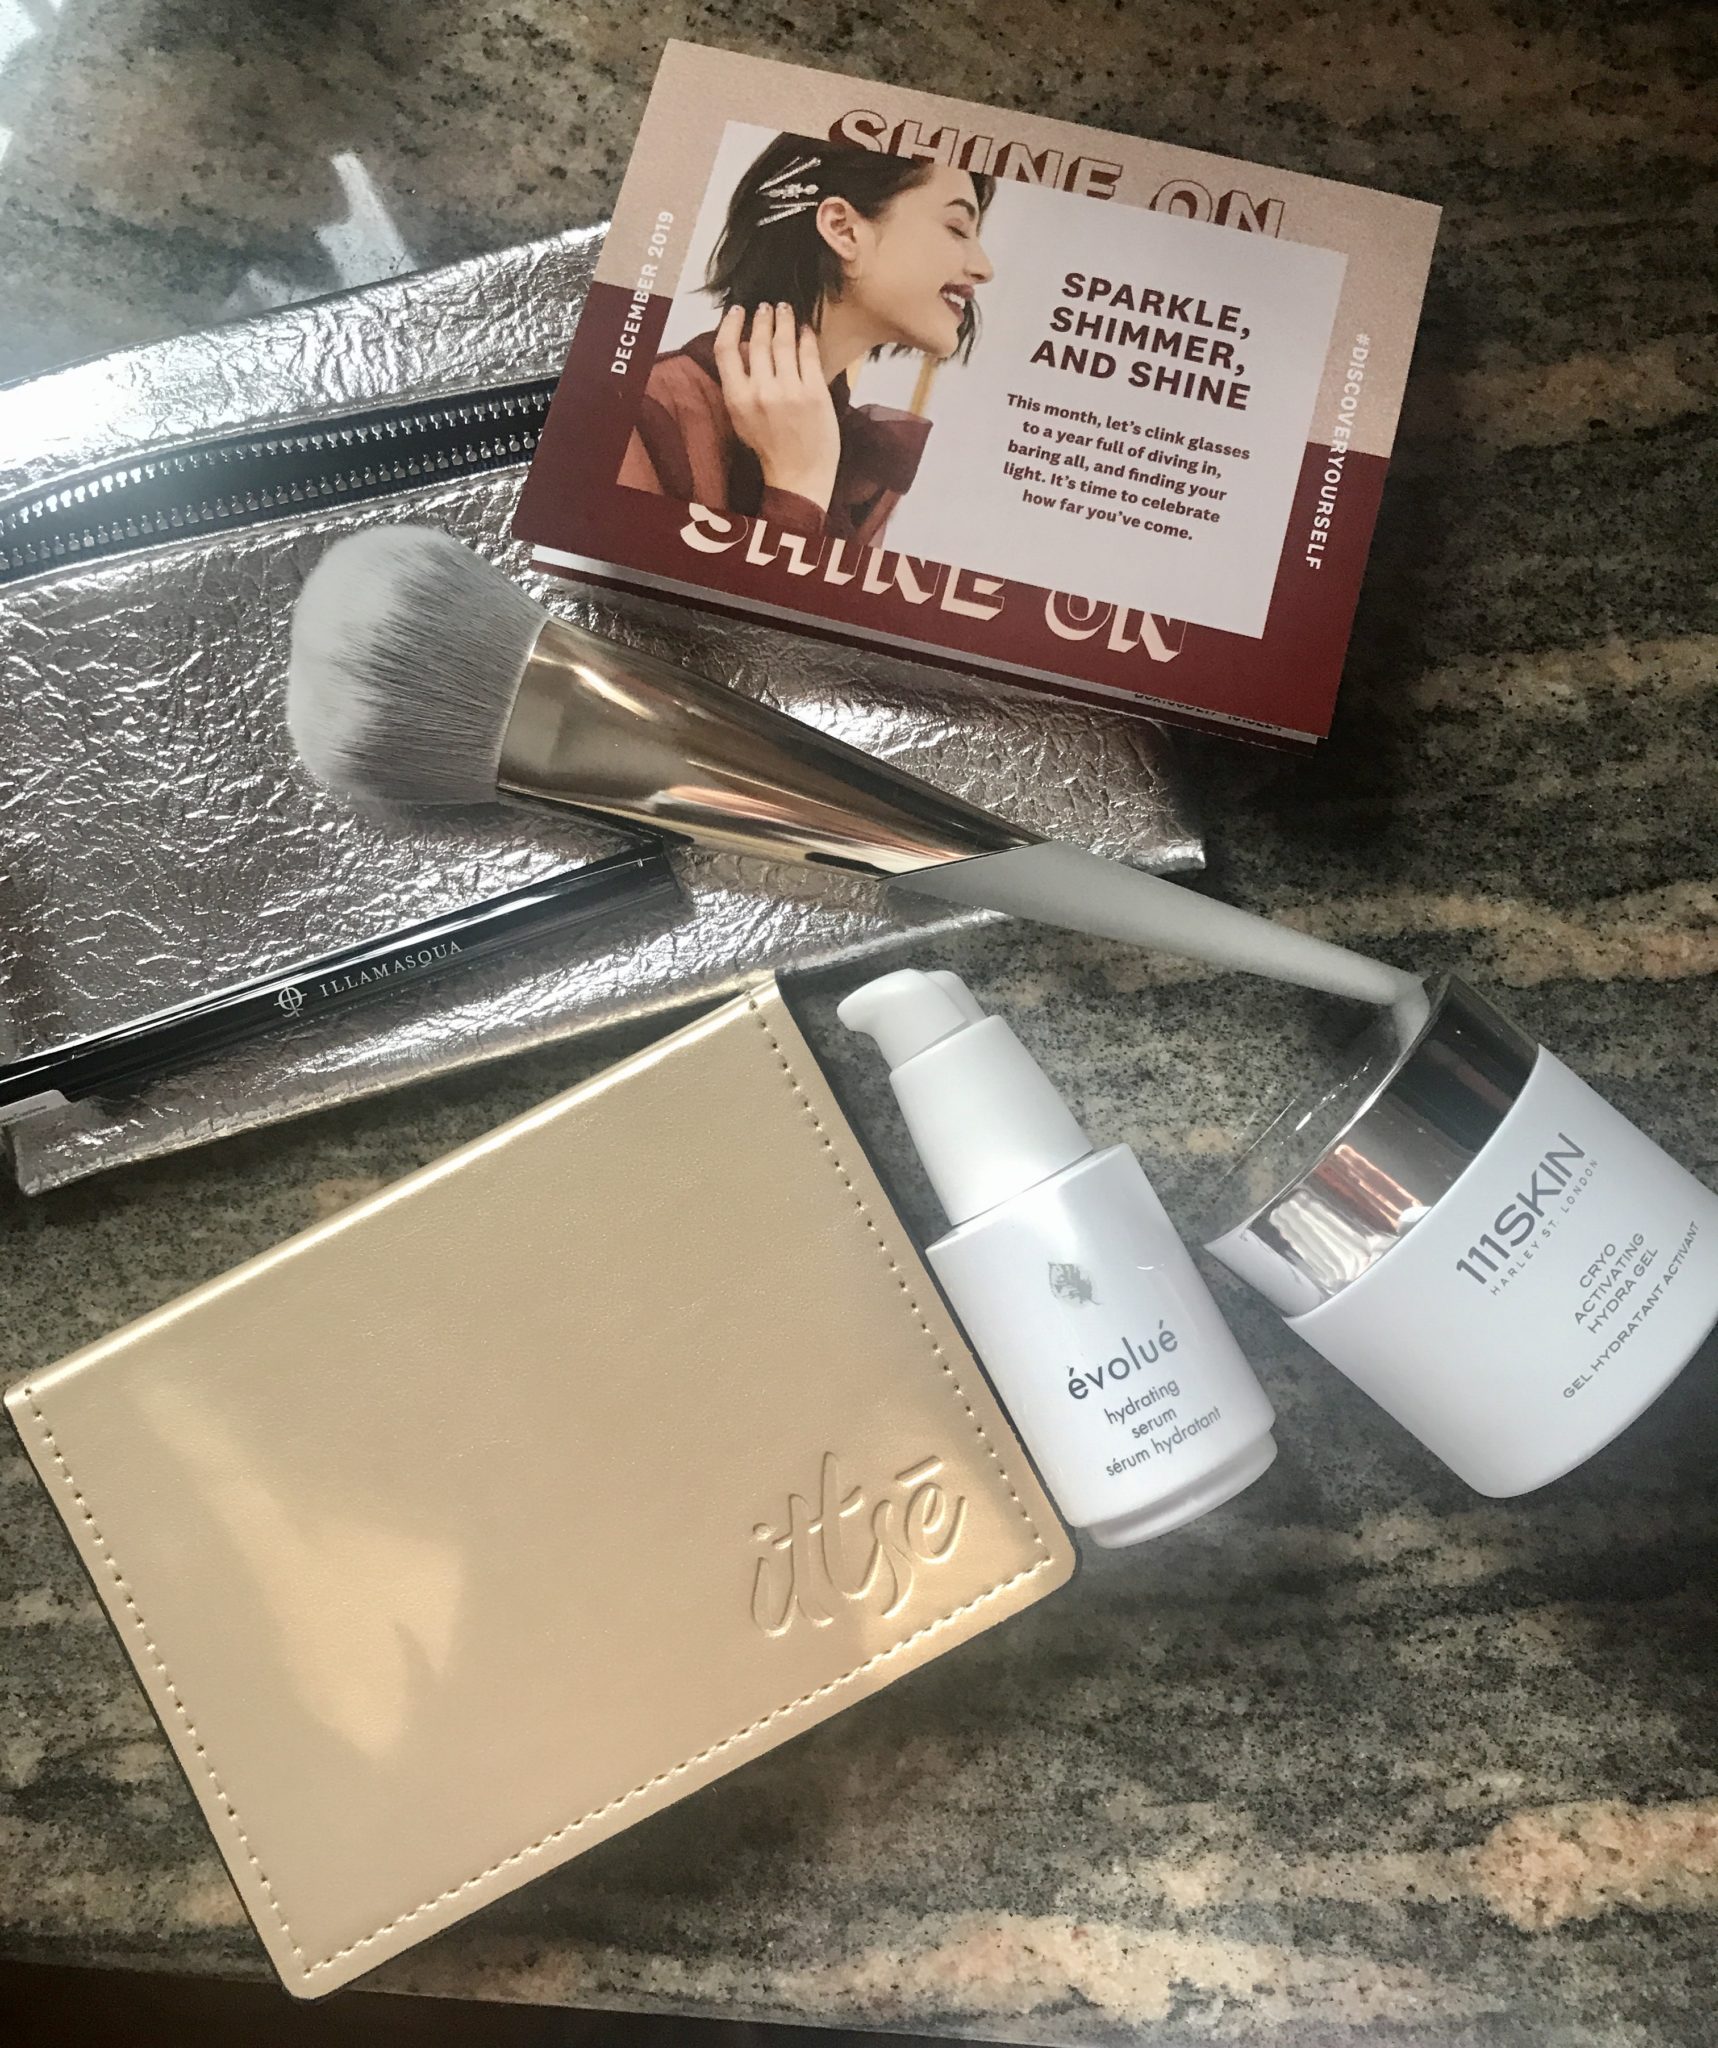 5 full size beauty products inside my "Shine On" Ipsy Glam Bag Plus for December 2019